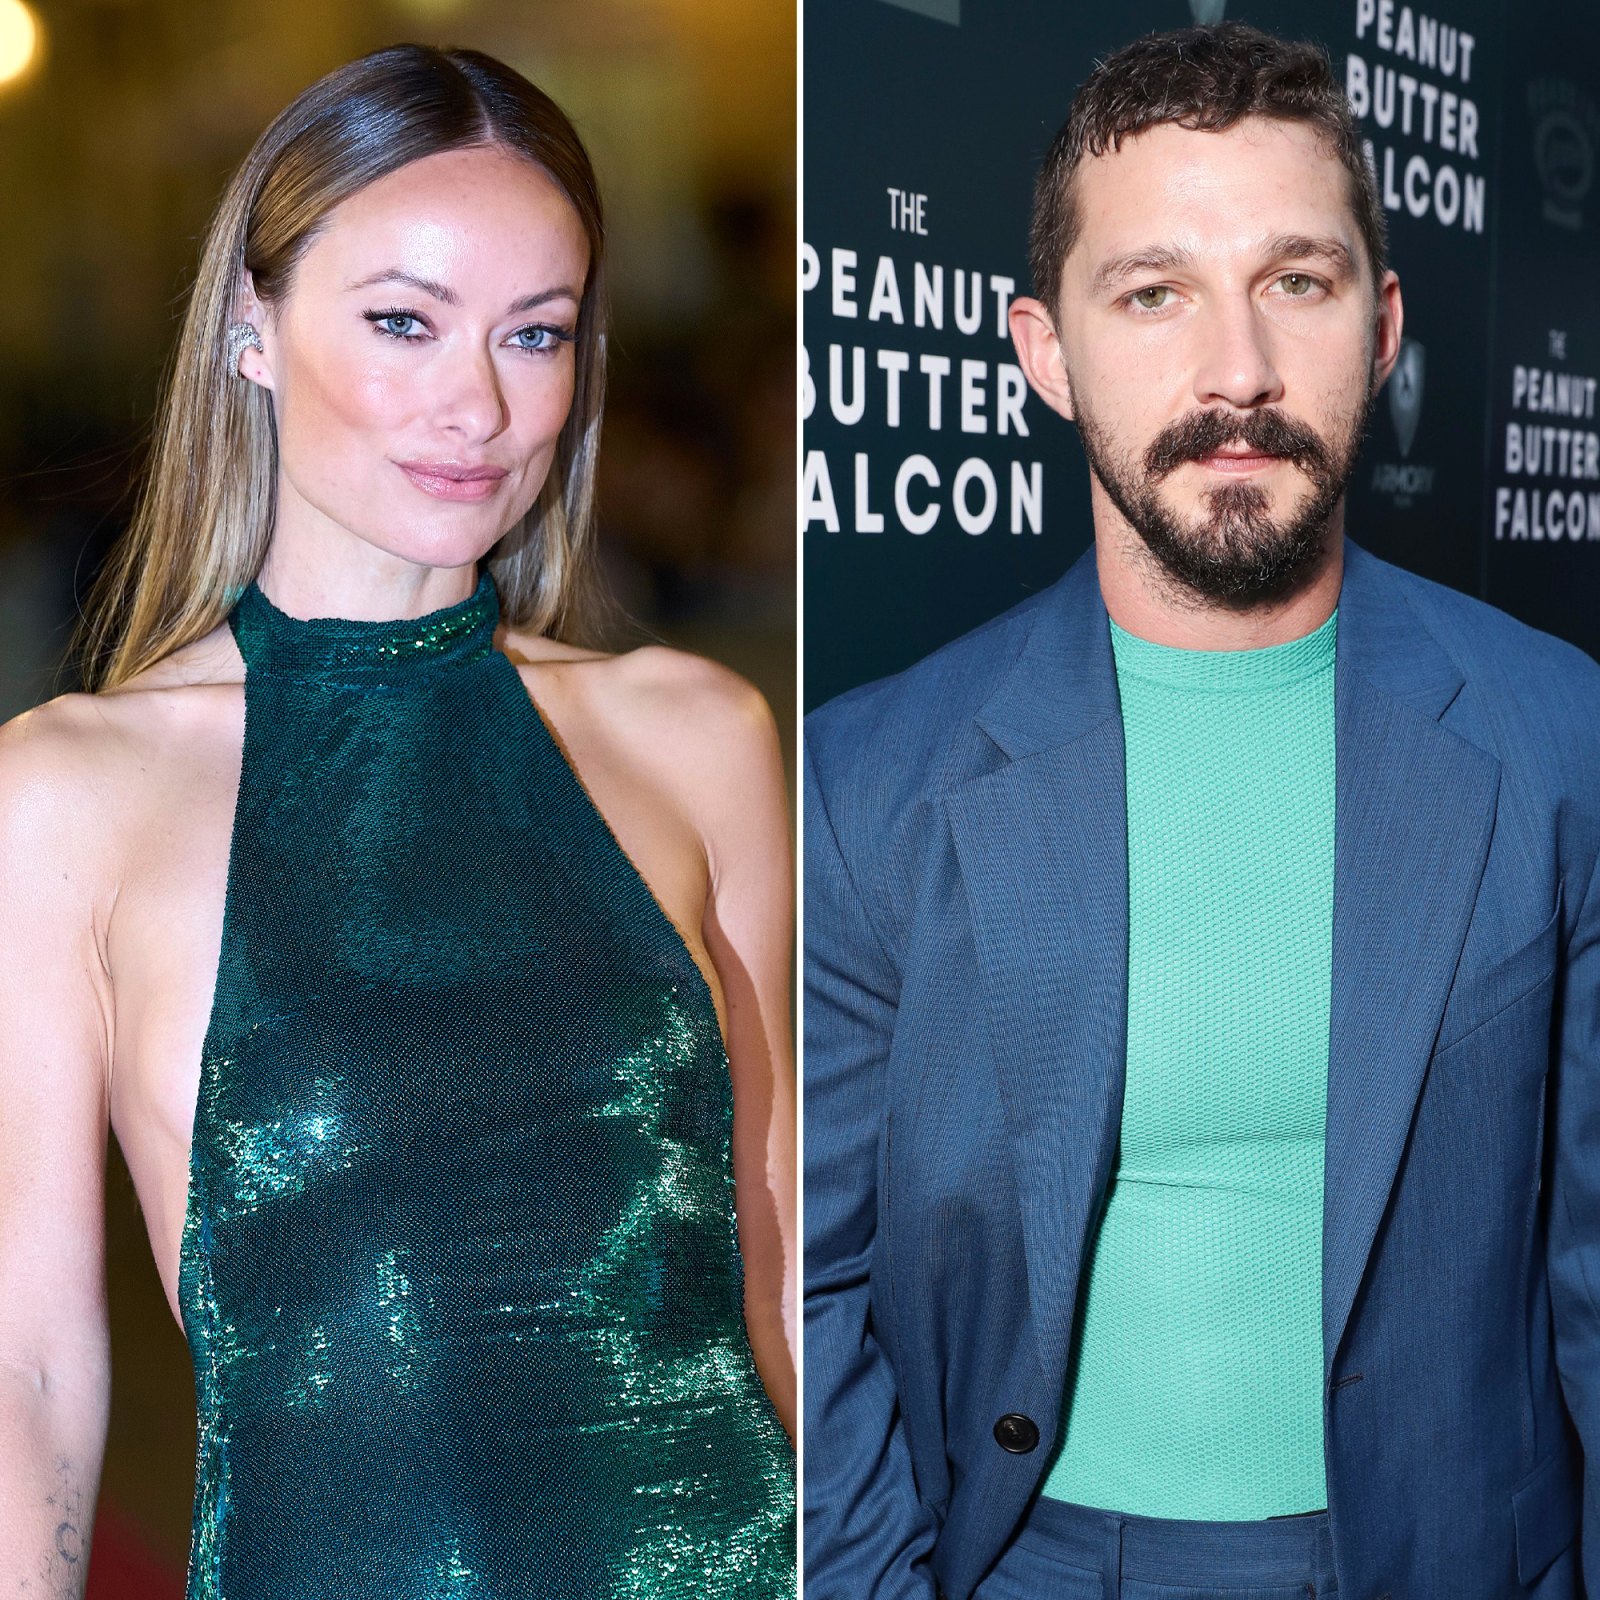 Olivia Wilde Says Shia LaBeouf Gave Her Ultimatum Between ‘Him or Florence Pugh’ for ‘Don’t Worry Darling